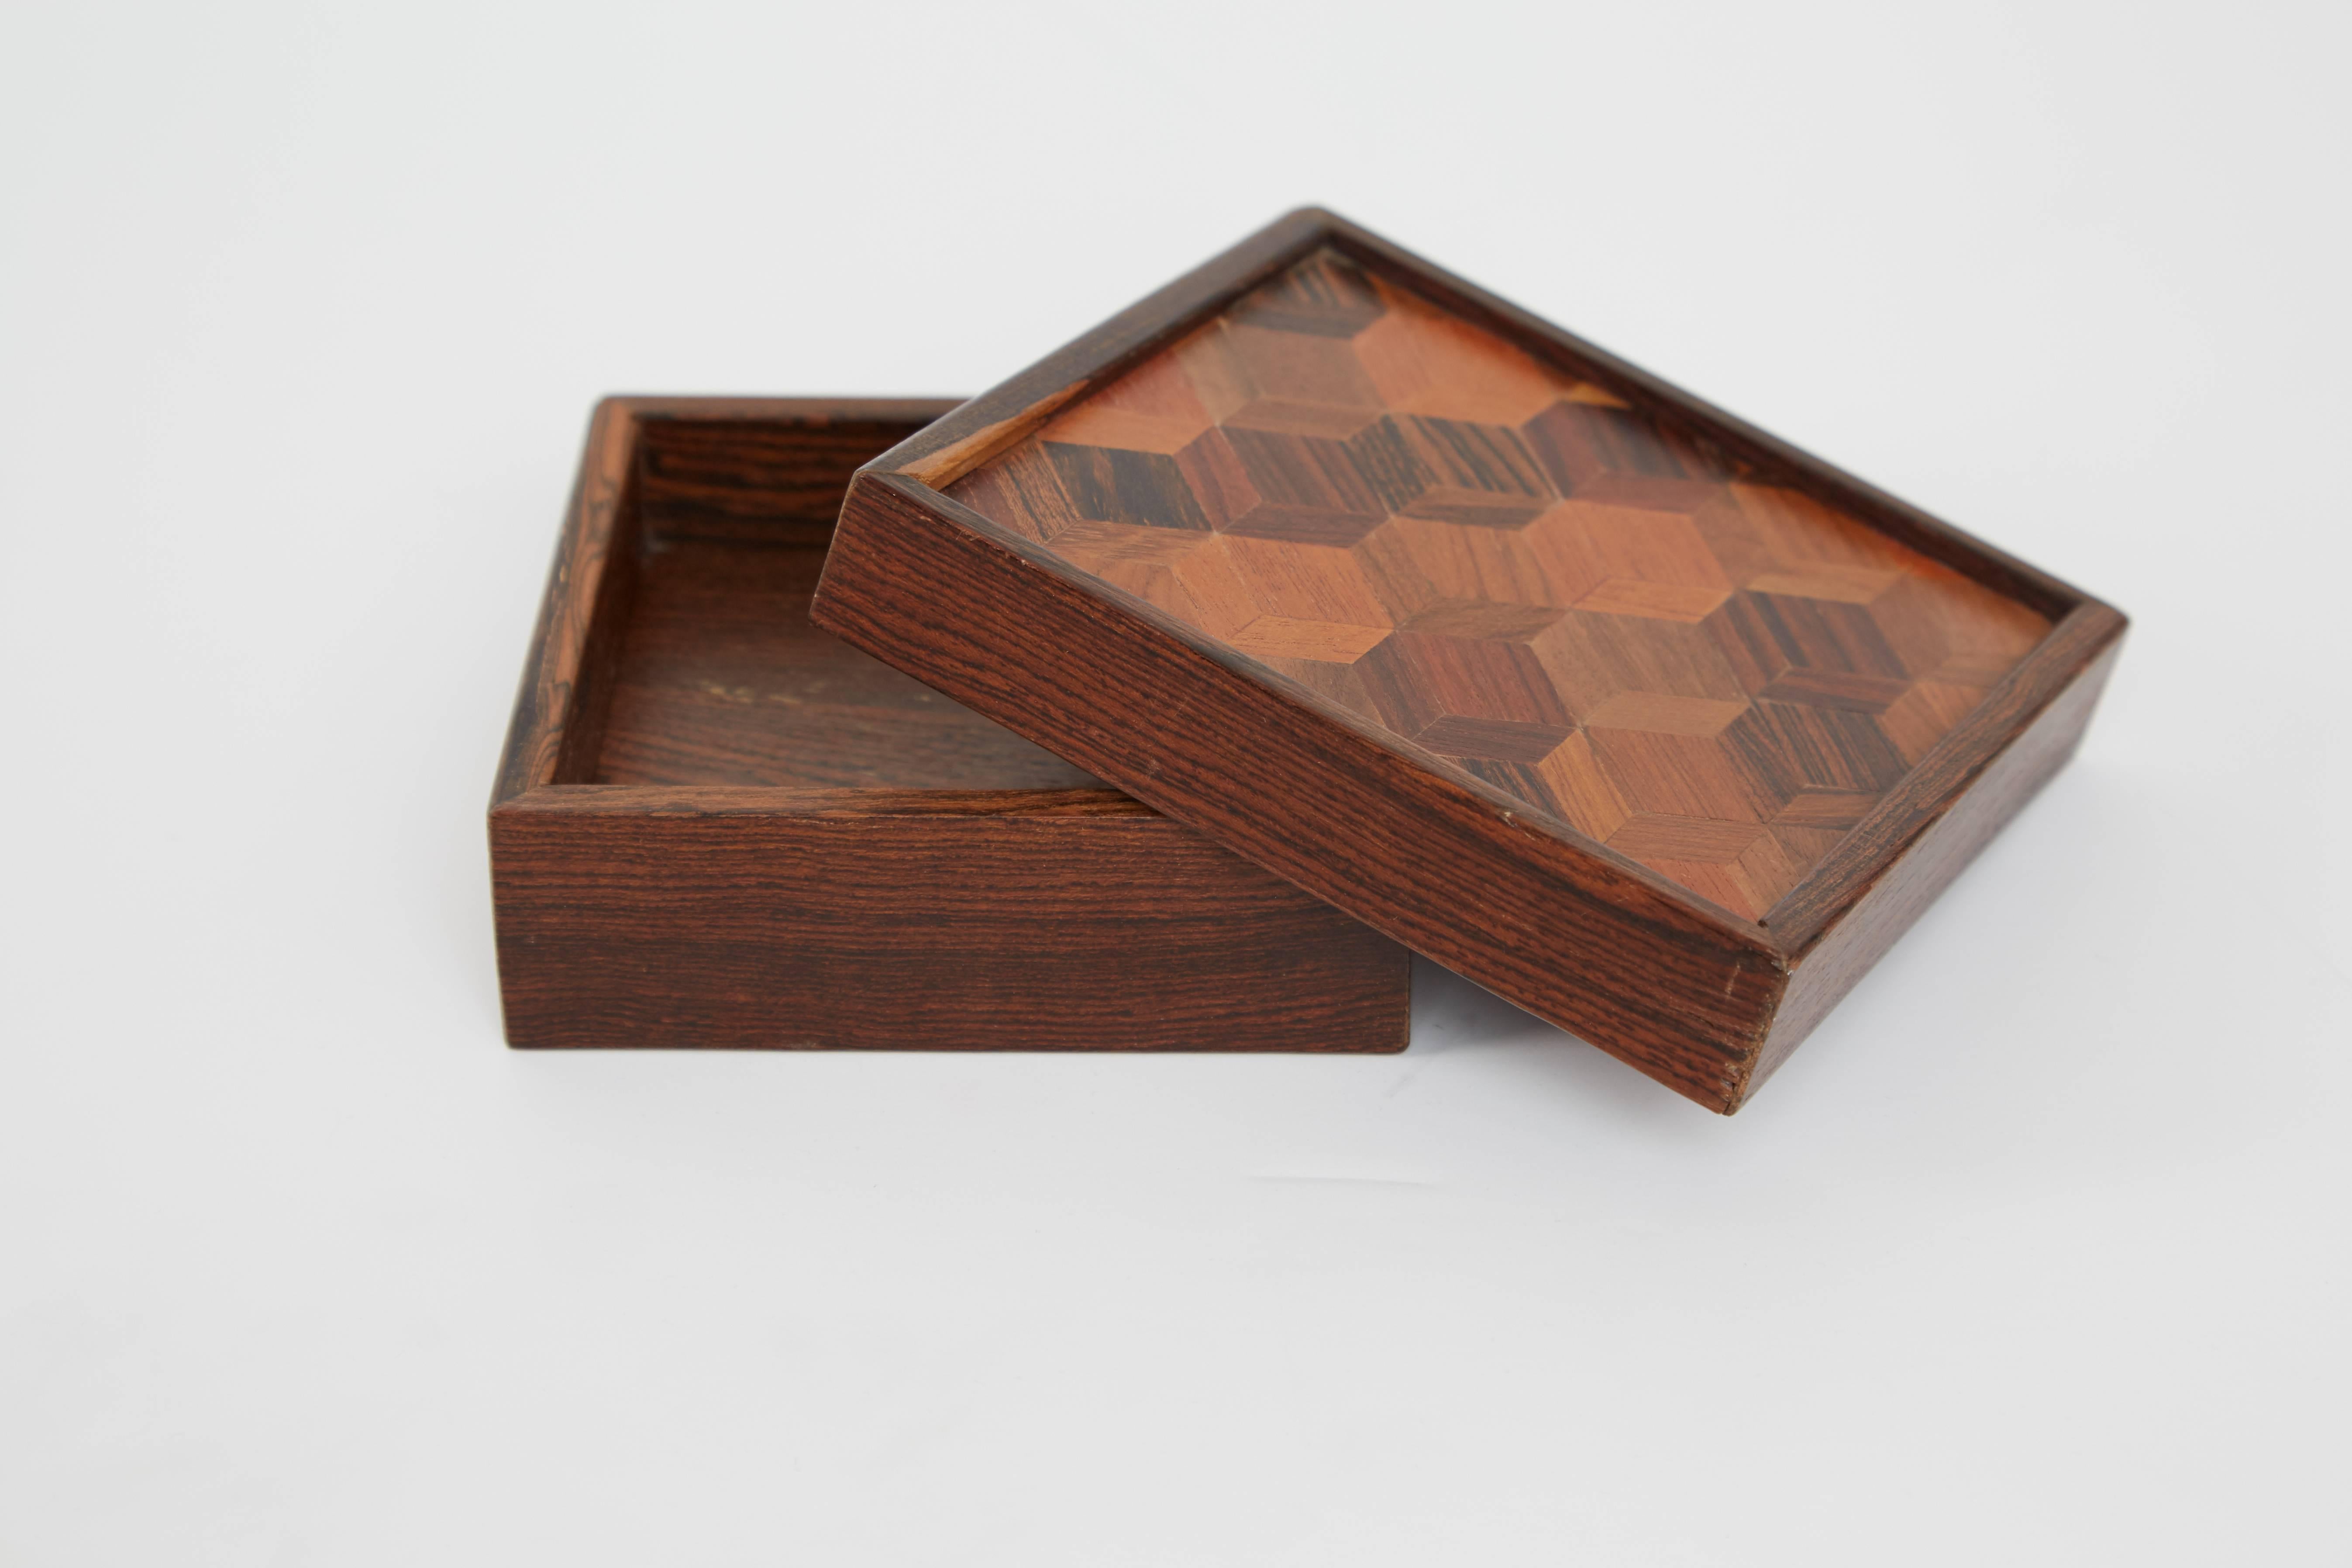 Exquisitely crafted petite box designed by Don Shoemaker for Señal of Mexico. Taking advantage of the expertise provided by Mexican artisans, Shoemaker founded Señal which produced utilitarian objects, such as this stunning example. 

This box